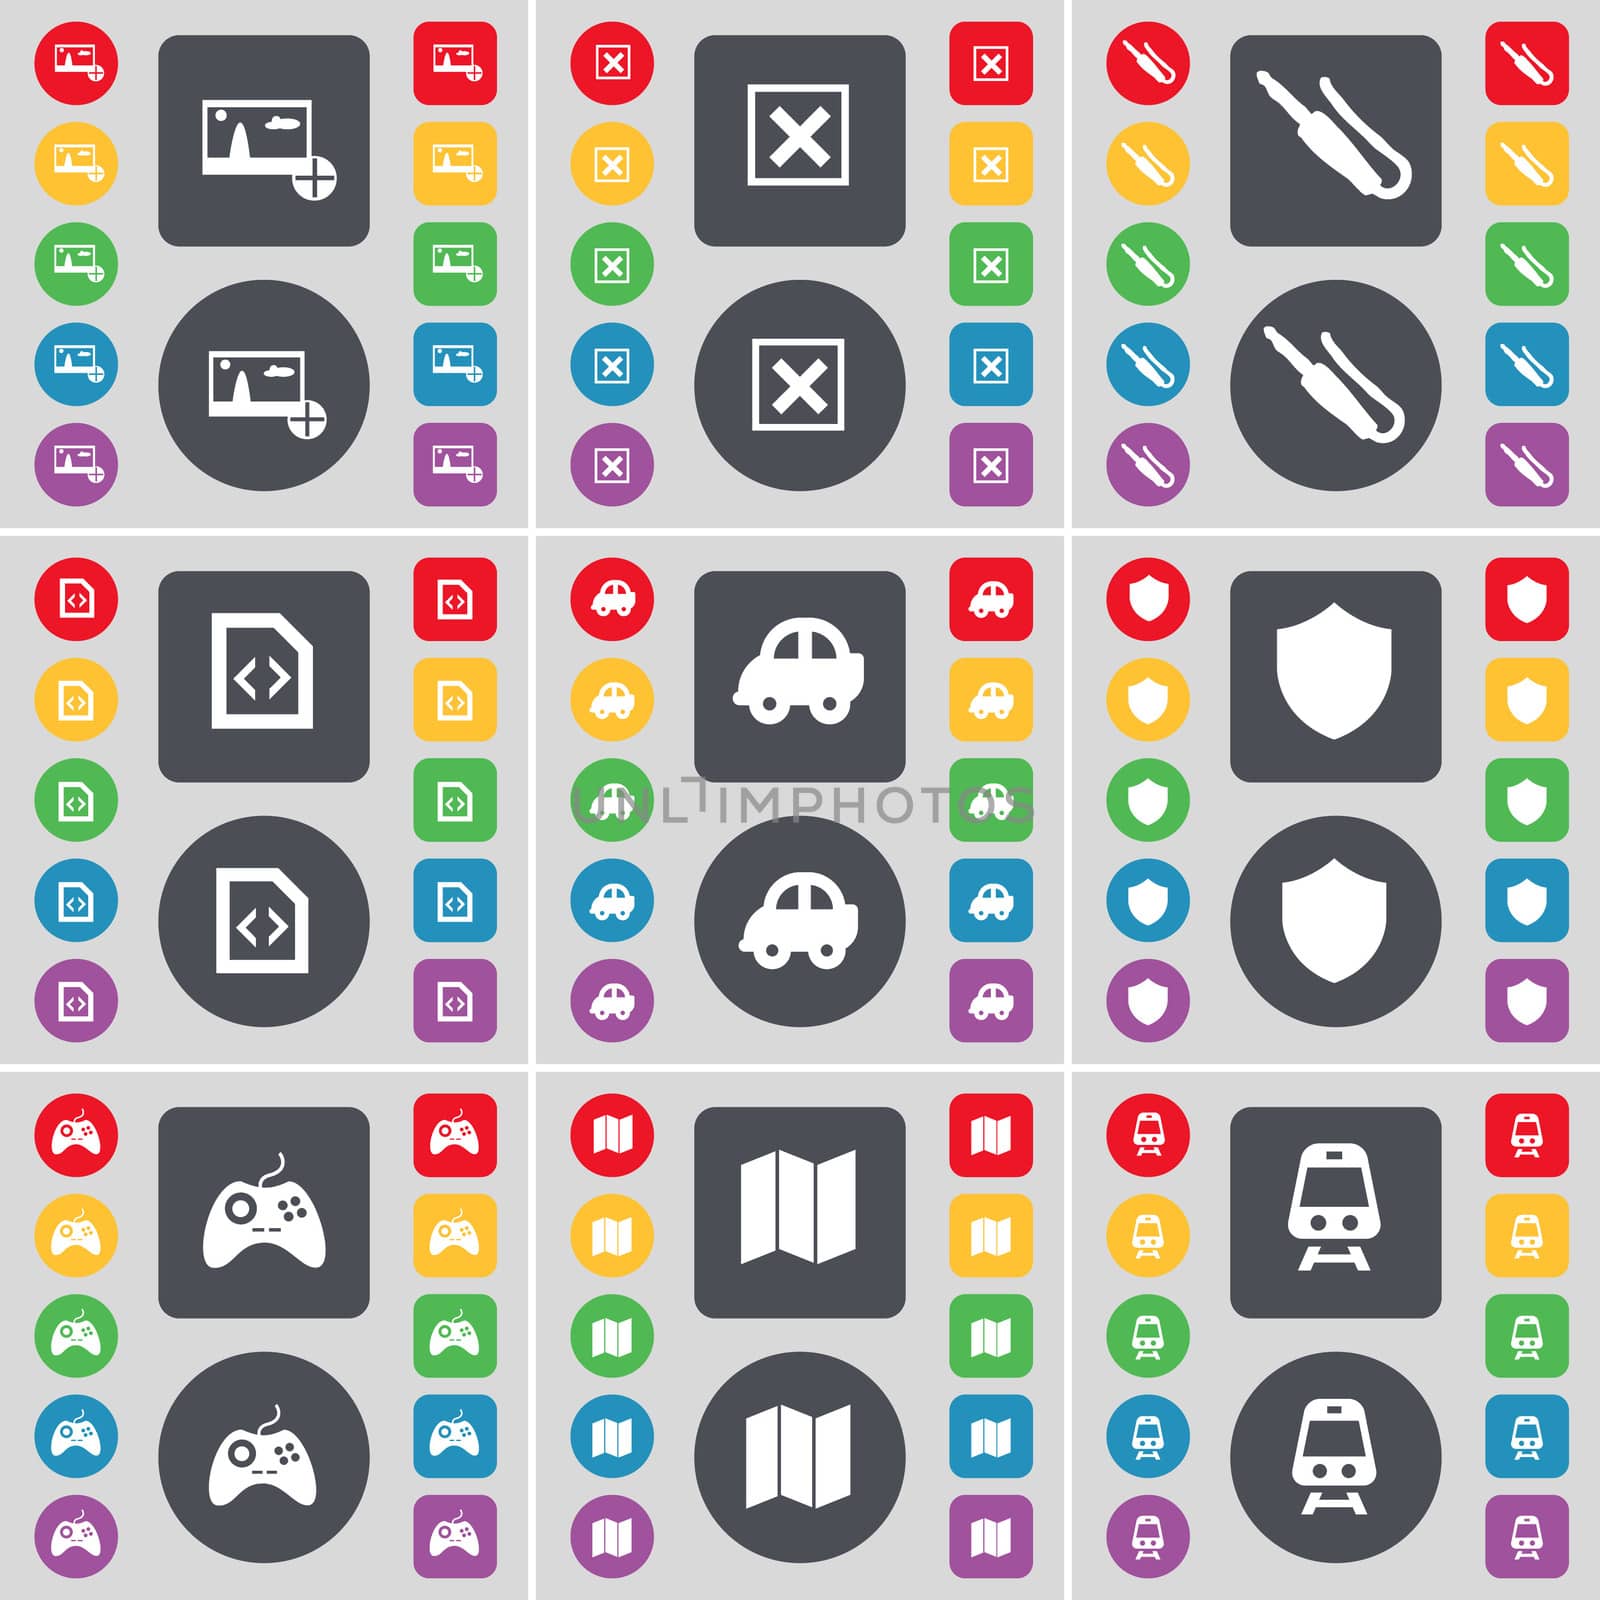 Picture, Stop, Microphone connector, File, Car, Badge, Gamepad, Map, Train icon symbol. A large set of flat, colored buttons for your design. illustration